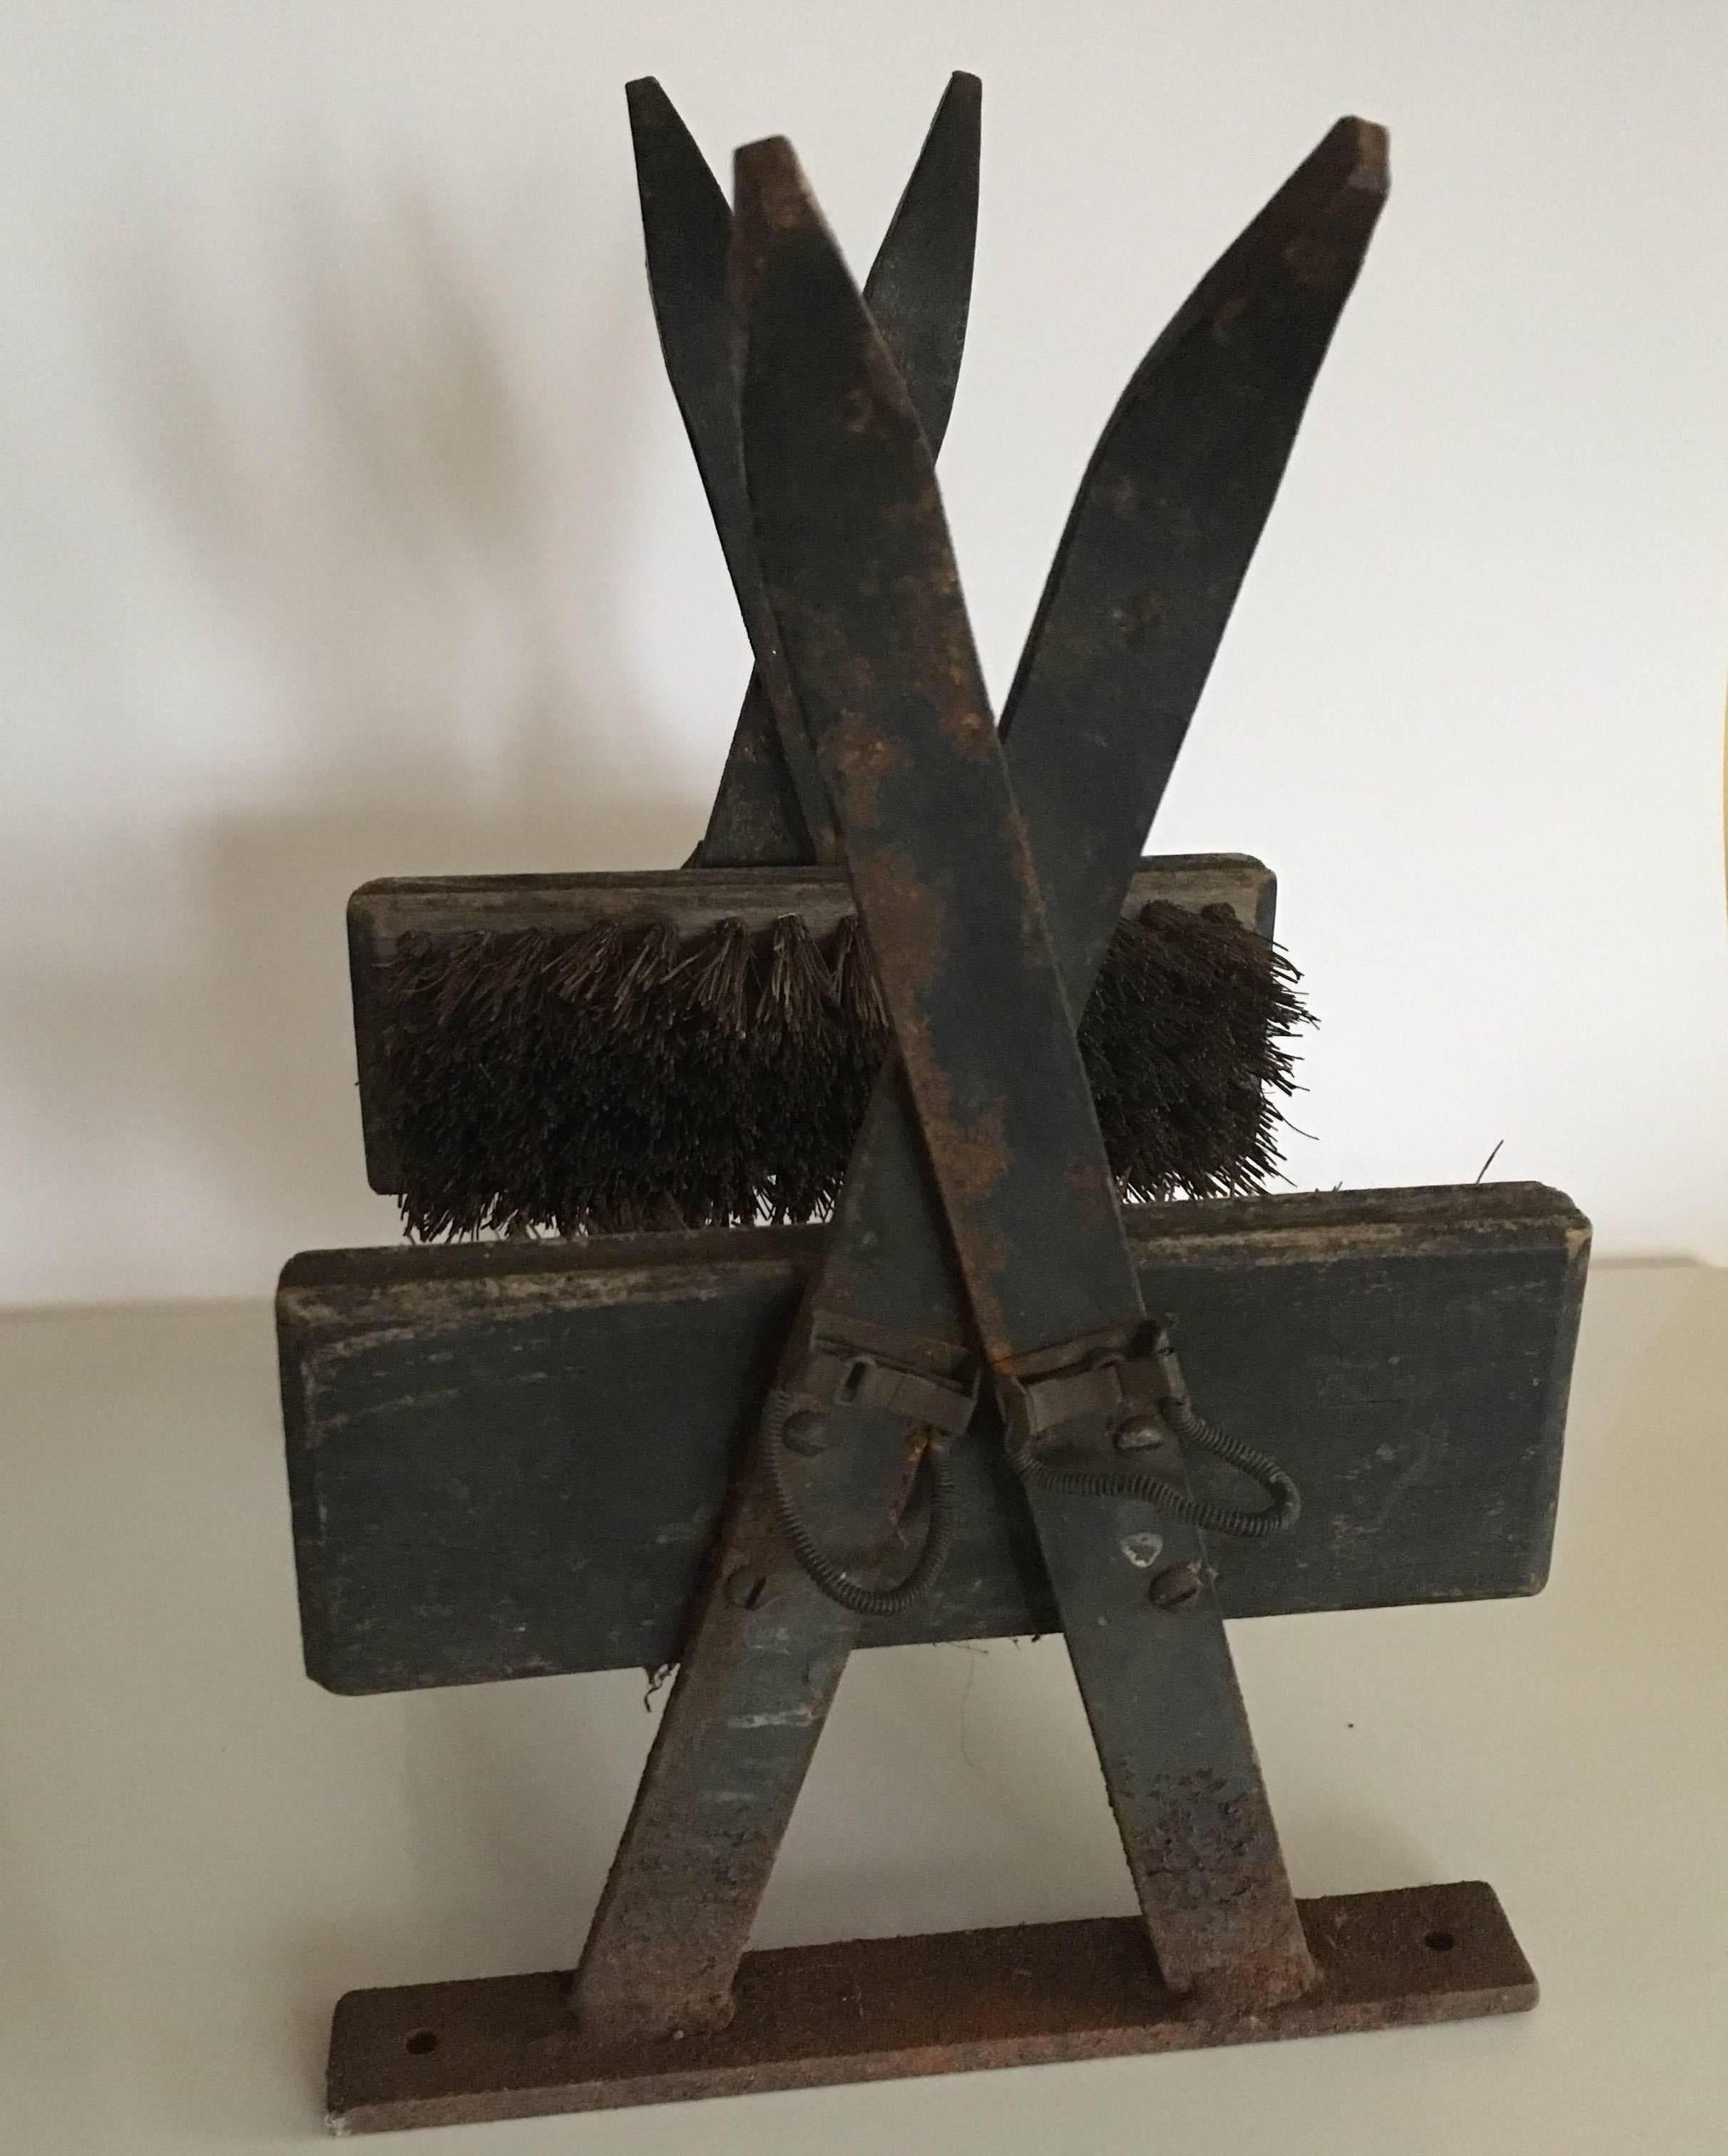 Vintage ski lodge iron boot scrape, early to midcentury, a bracket of cast iron (or steel) crossed skis holding a pair of brushes with stiff bristle and wooden backs. Great style overall including the old style cable boot bindings. In very good used